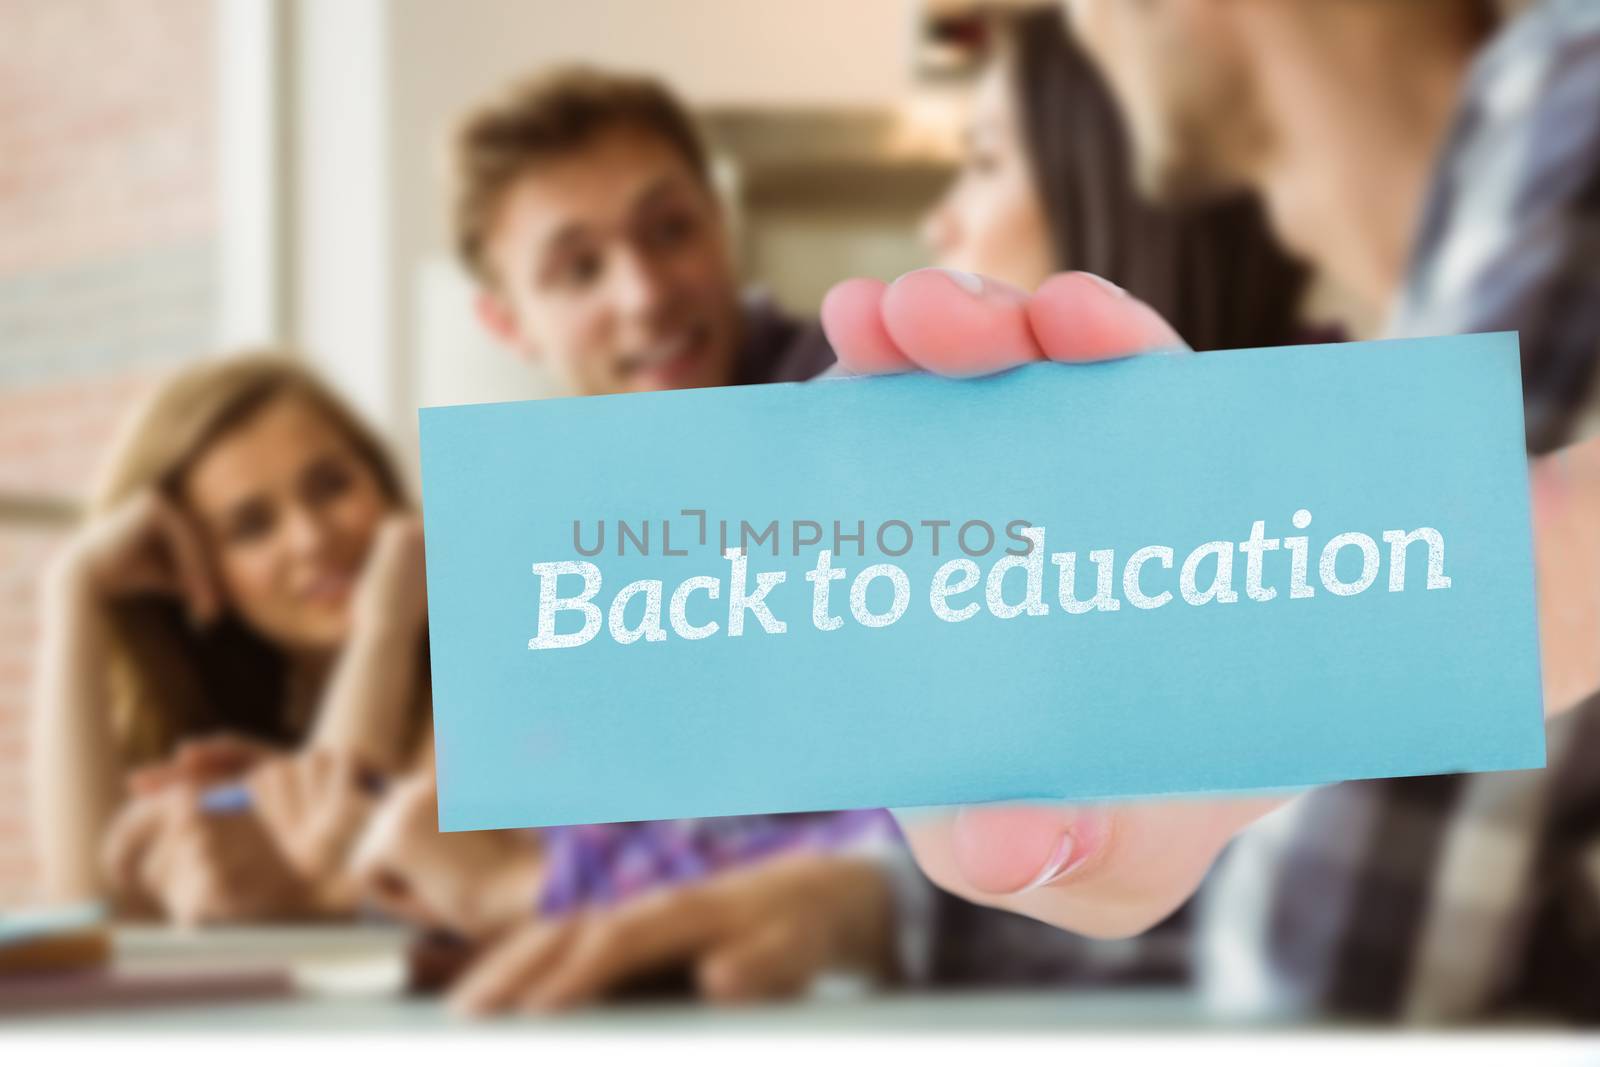 The word back to education and hand showing card against smiling friends students talking together